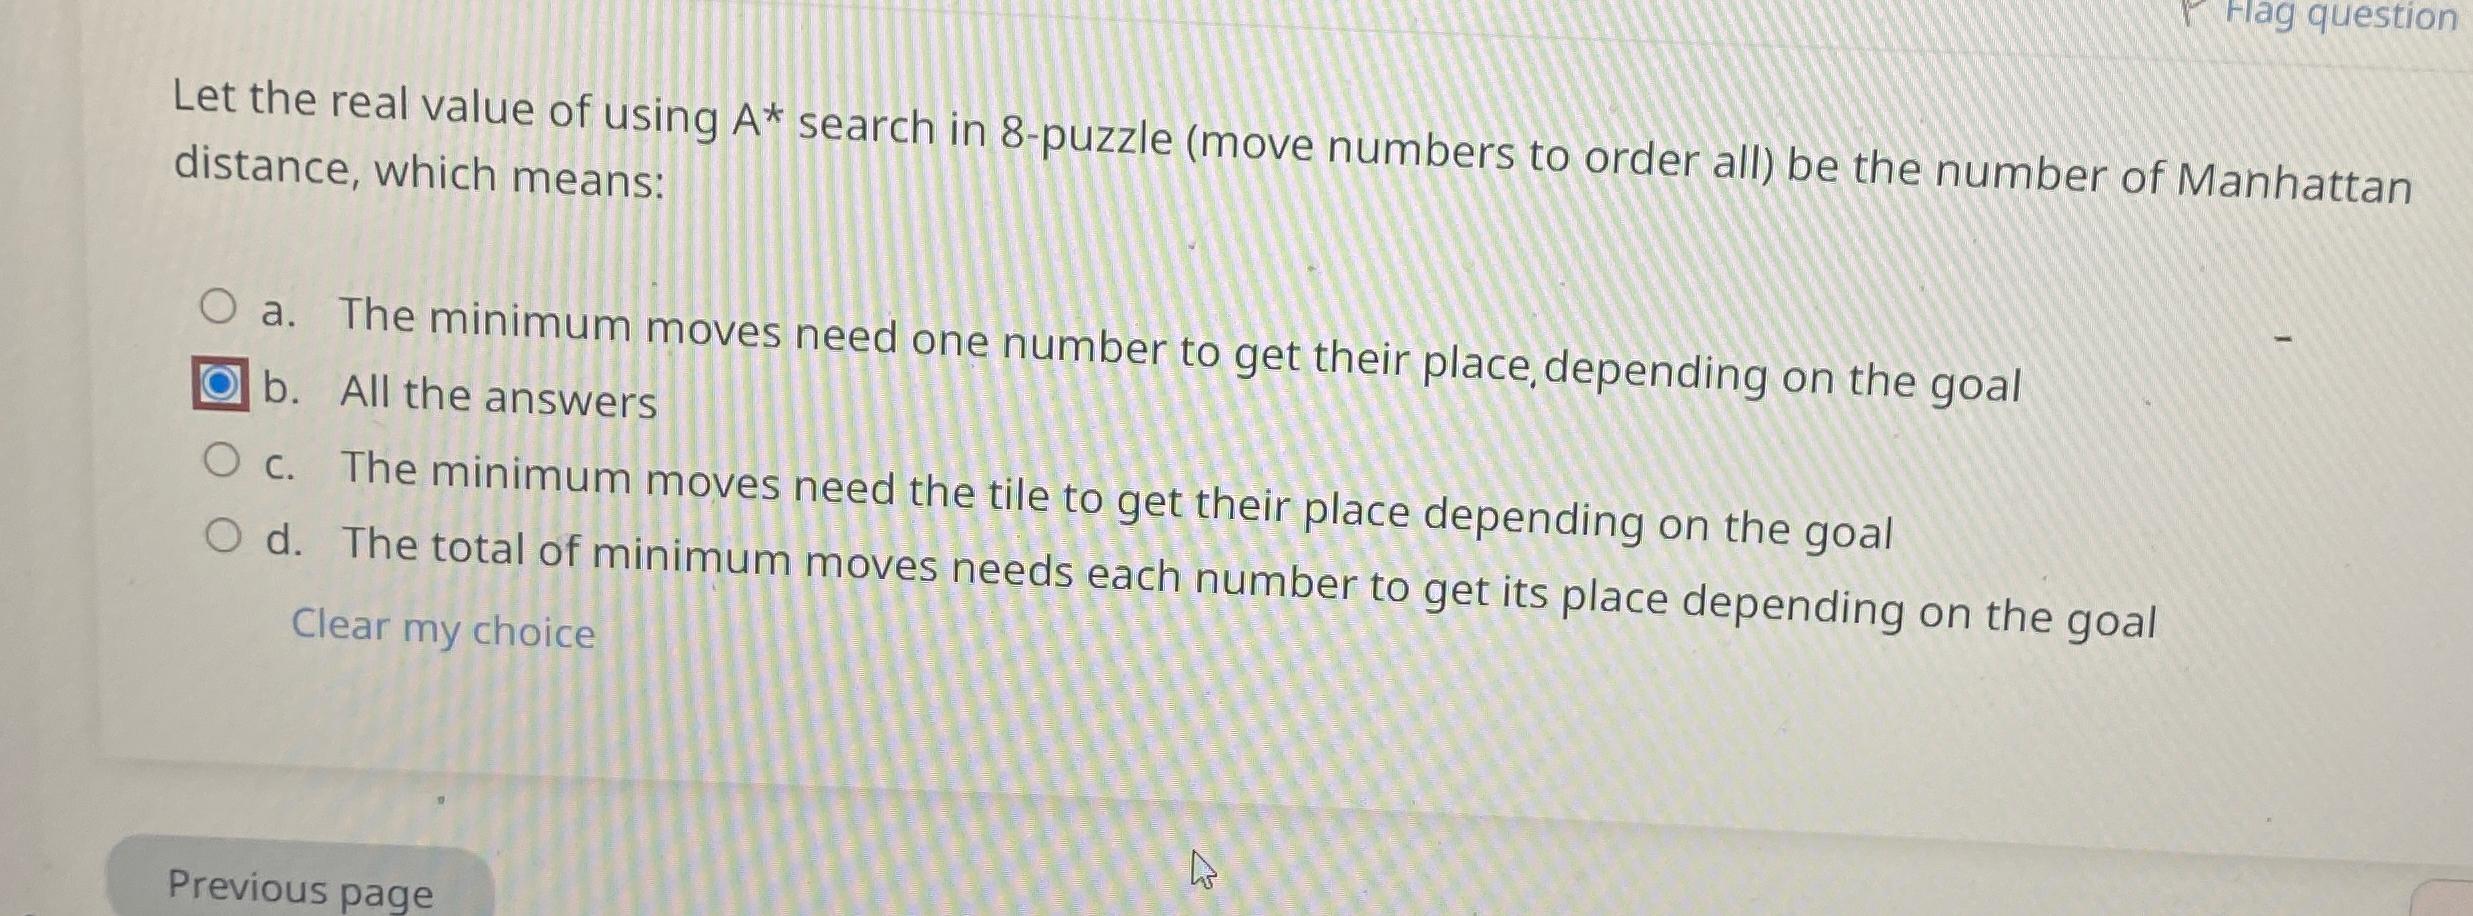 Let the real value of using A* search in 8-puzzle (move numbers to order all) be the number of Manhattan